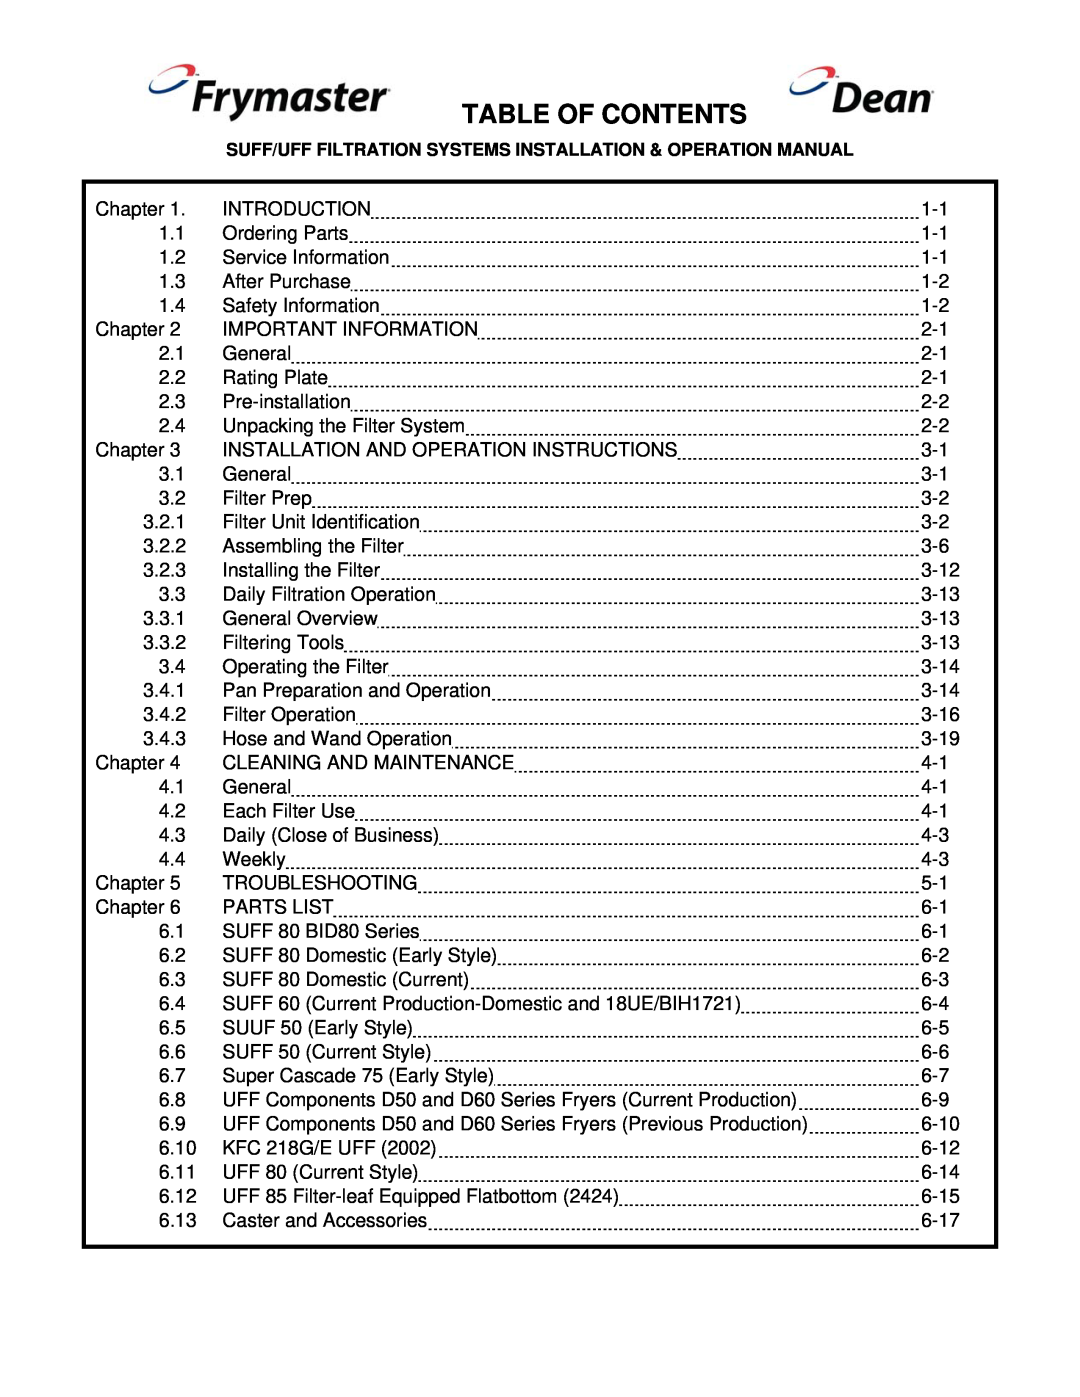 Frymaster 8195809 operation manual Table Of Contents 